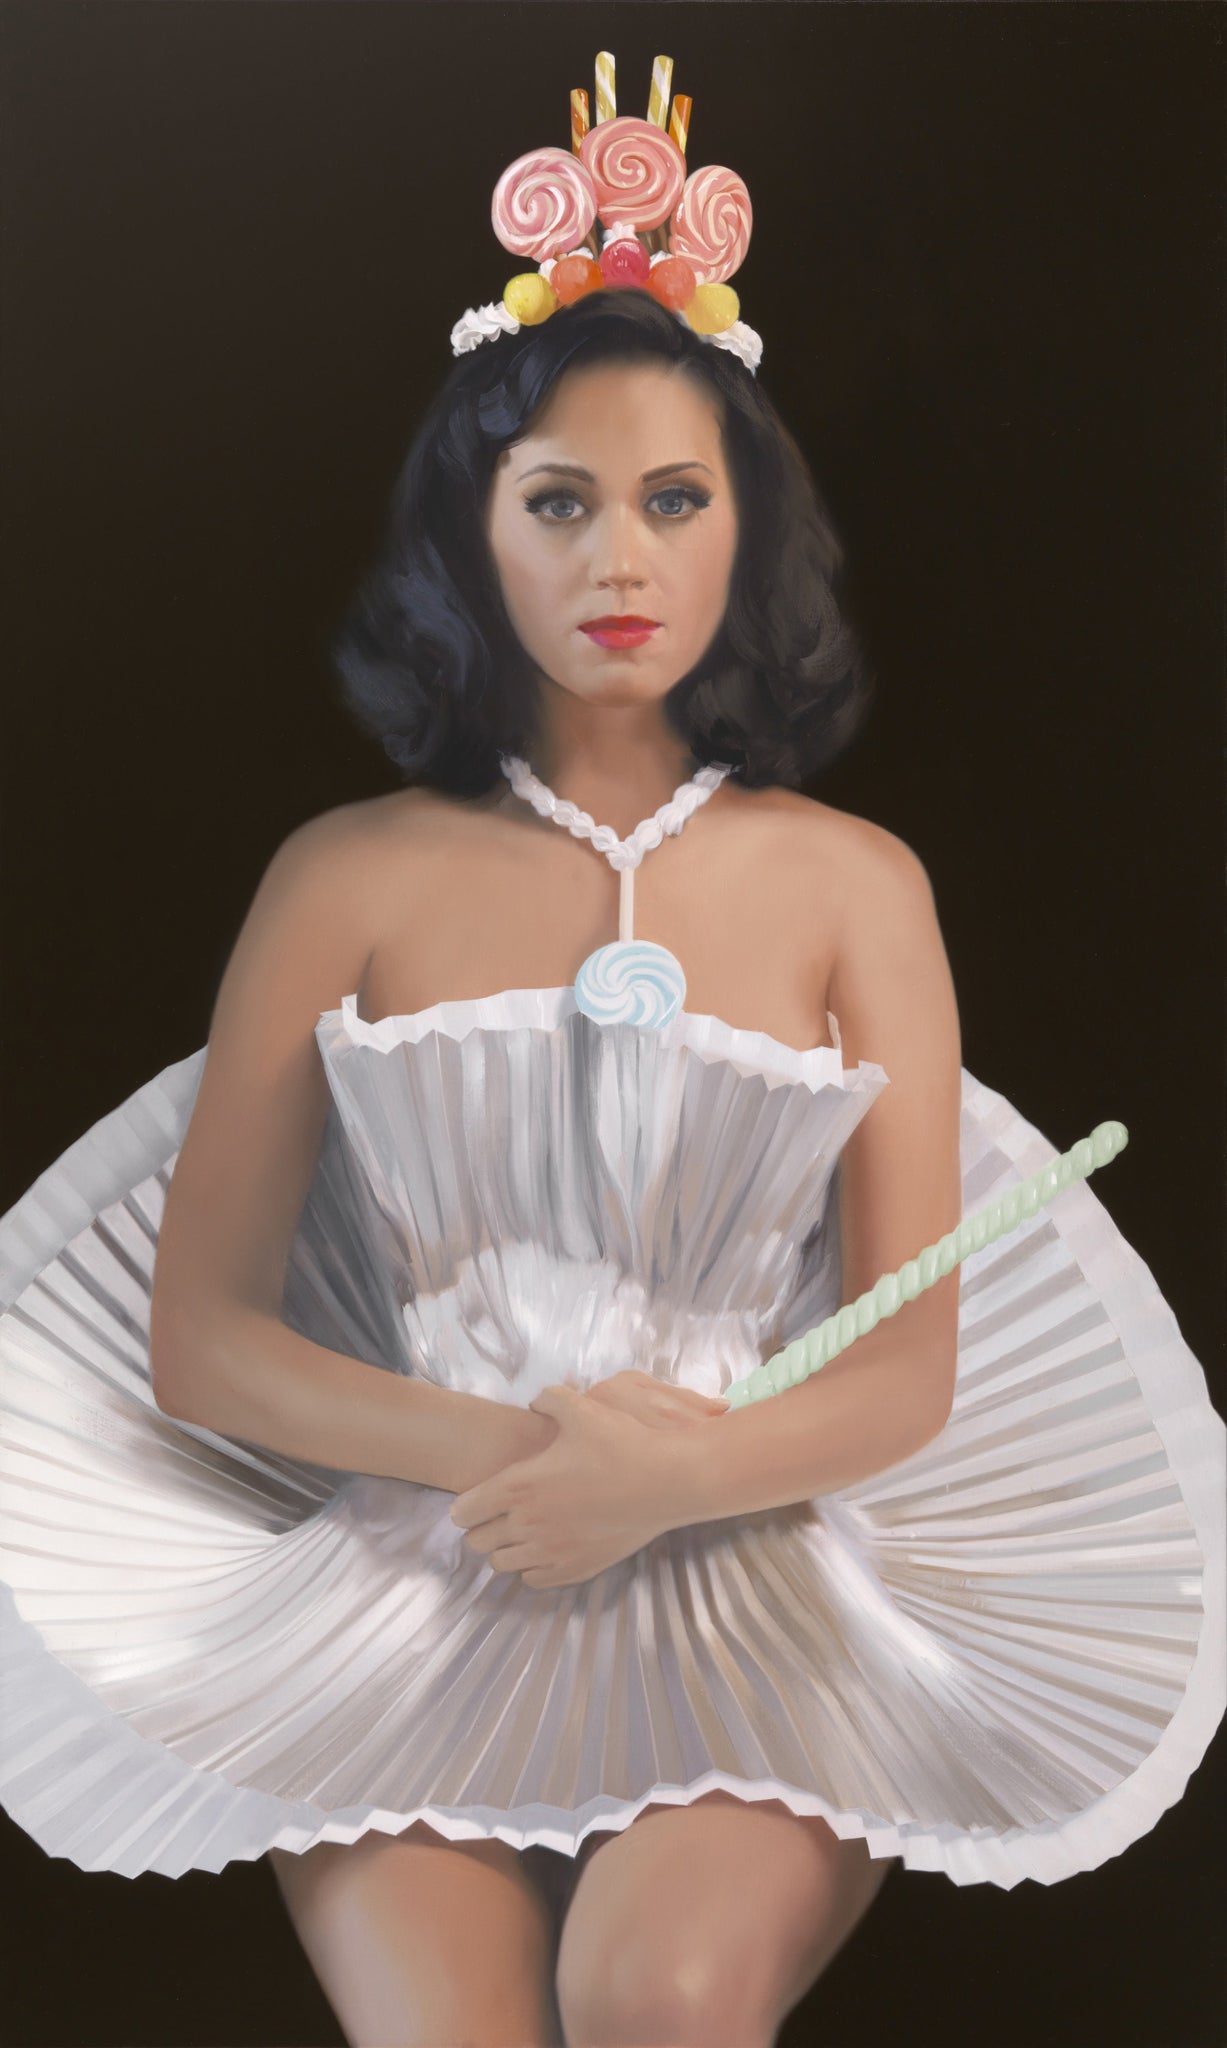 Will Cotton's portrait of Katy Perry, entitled Cupcake Katy